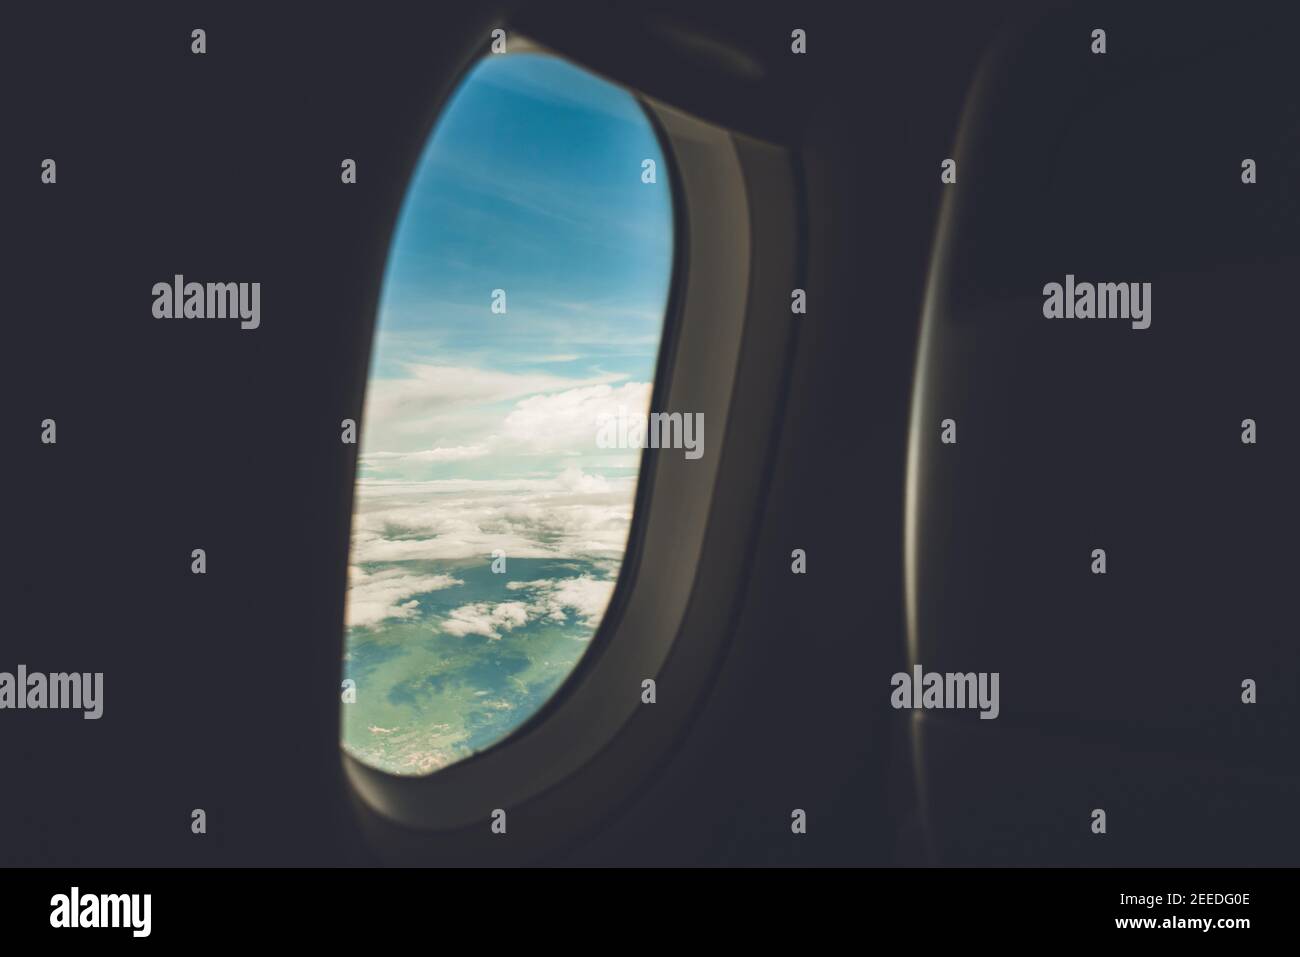 Beautiful nature scenery looking through open window of the airplane from the cabin, passenger view while traveling on board Stock Photo